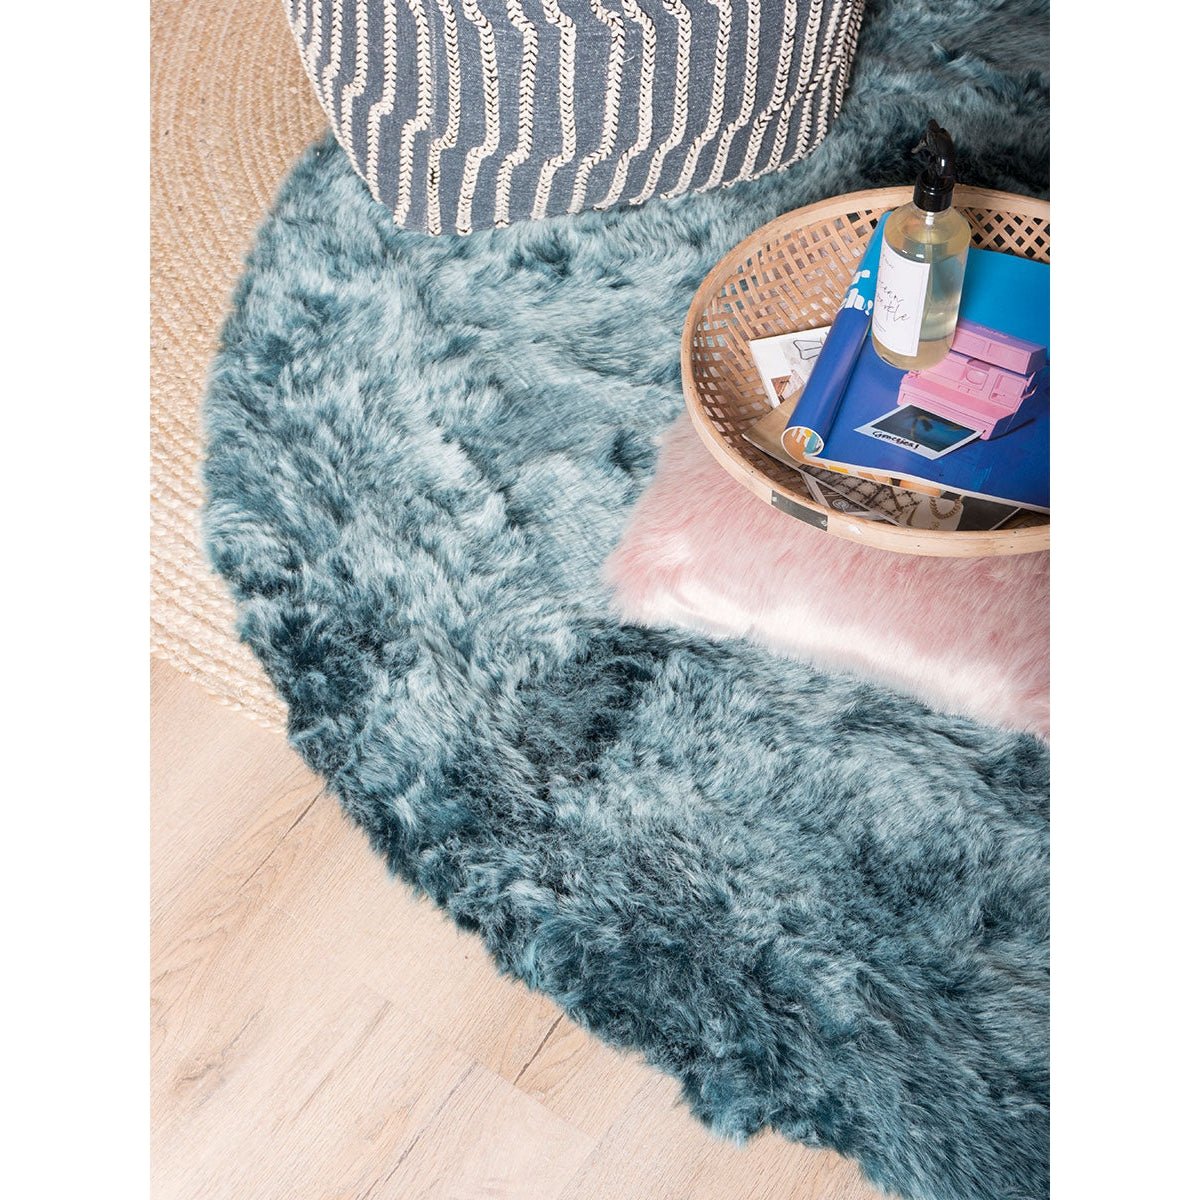 Donsie Tapijt Blauw Rond ø160 cm - House of Baboon - Home67